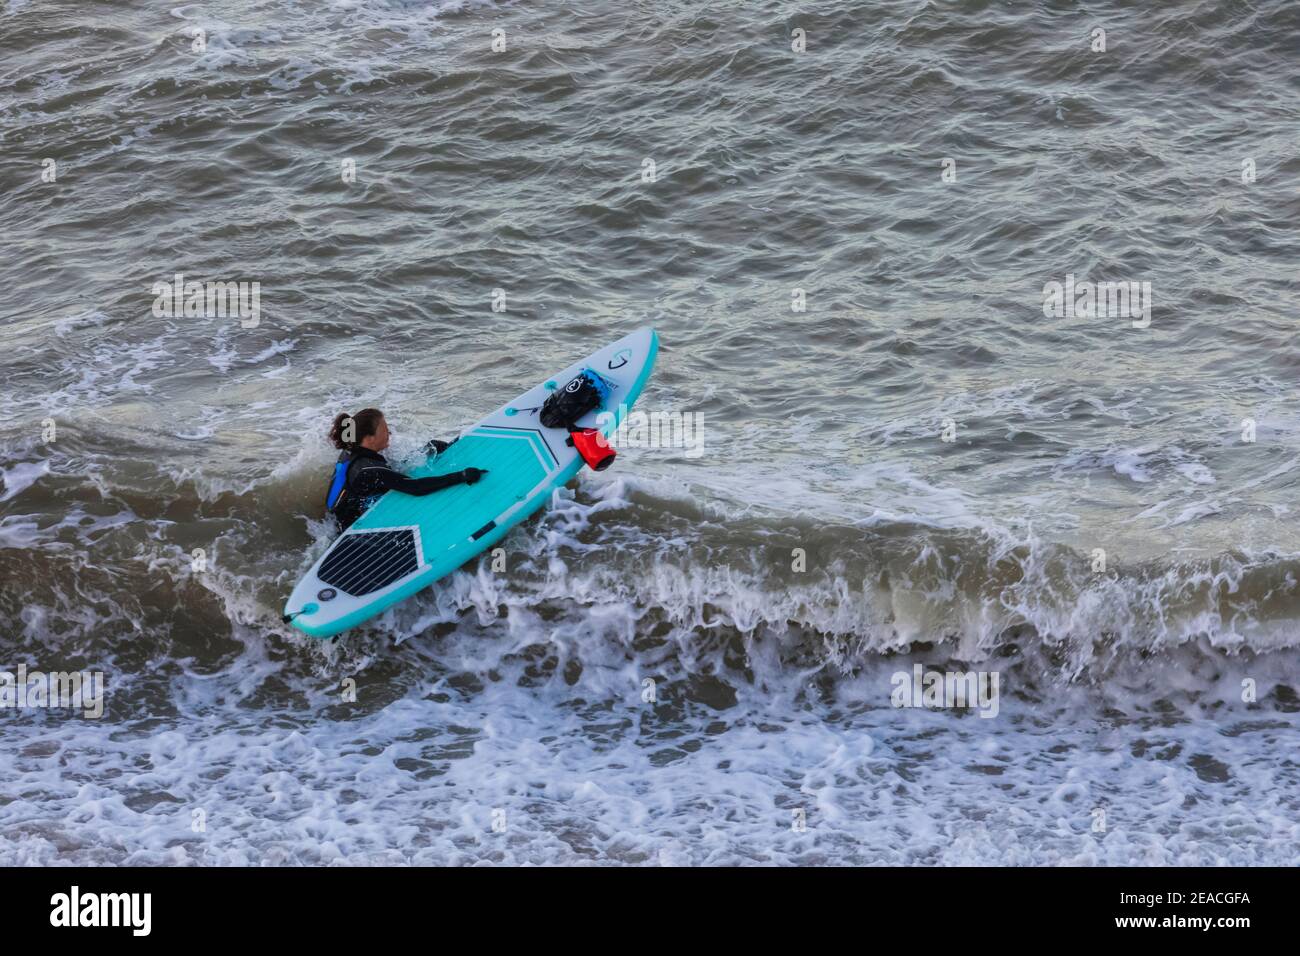 England, East Sussex, Eastbourne, Birling Gap, Paddle Boarder Entering the Water Stock Photo